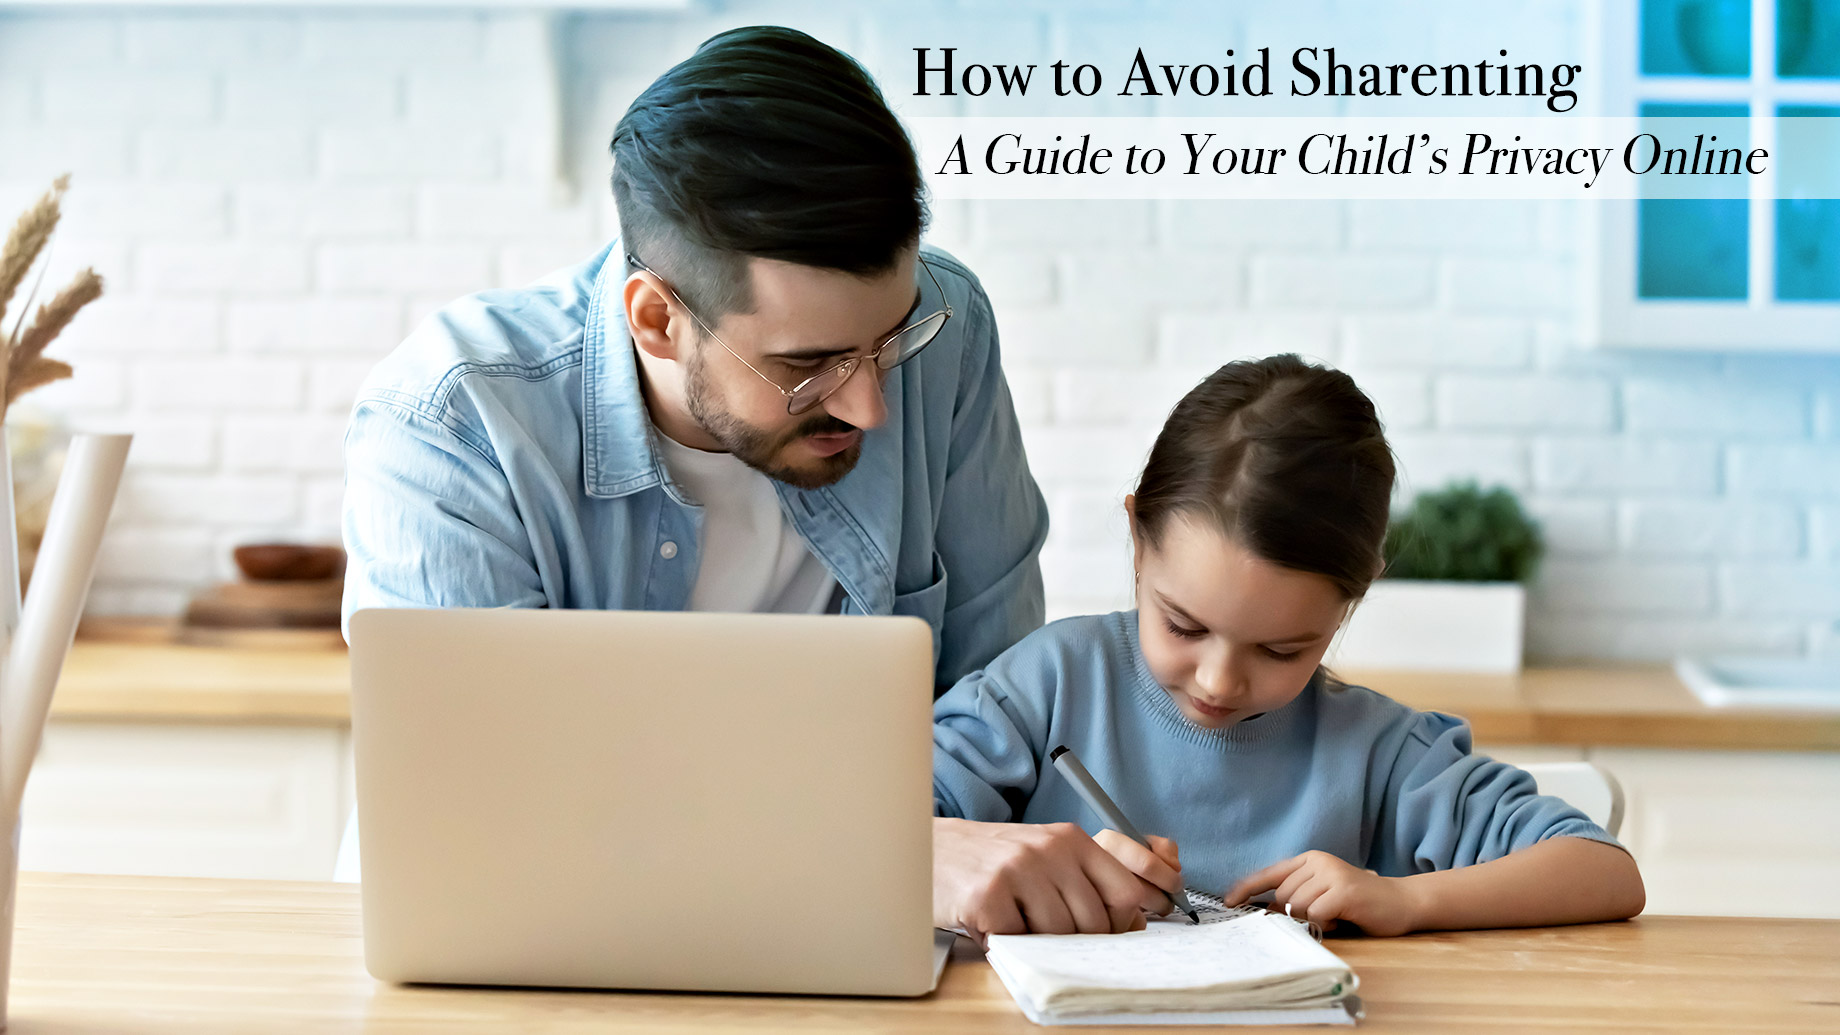 How to Avoid Sharenting - A Guide to Your Child’s Privacy Online